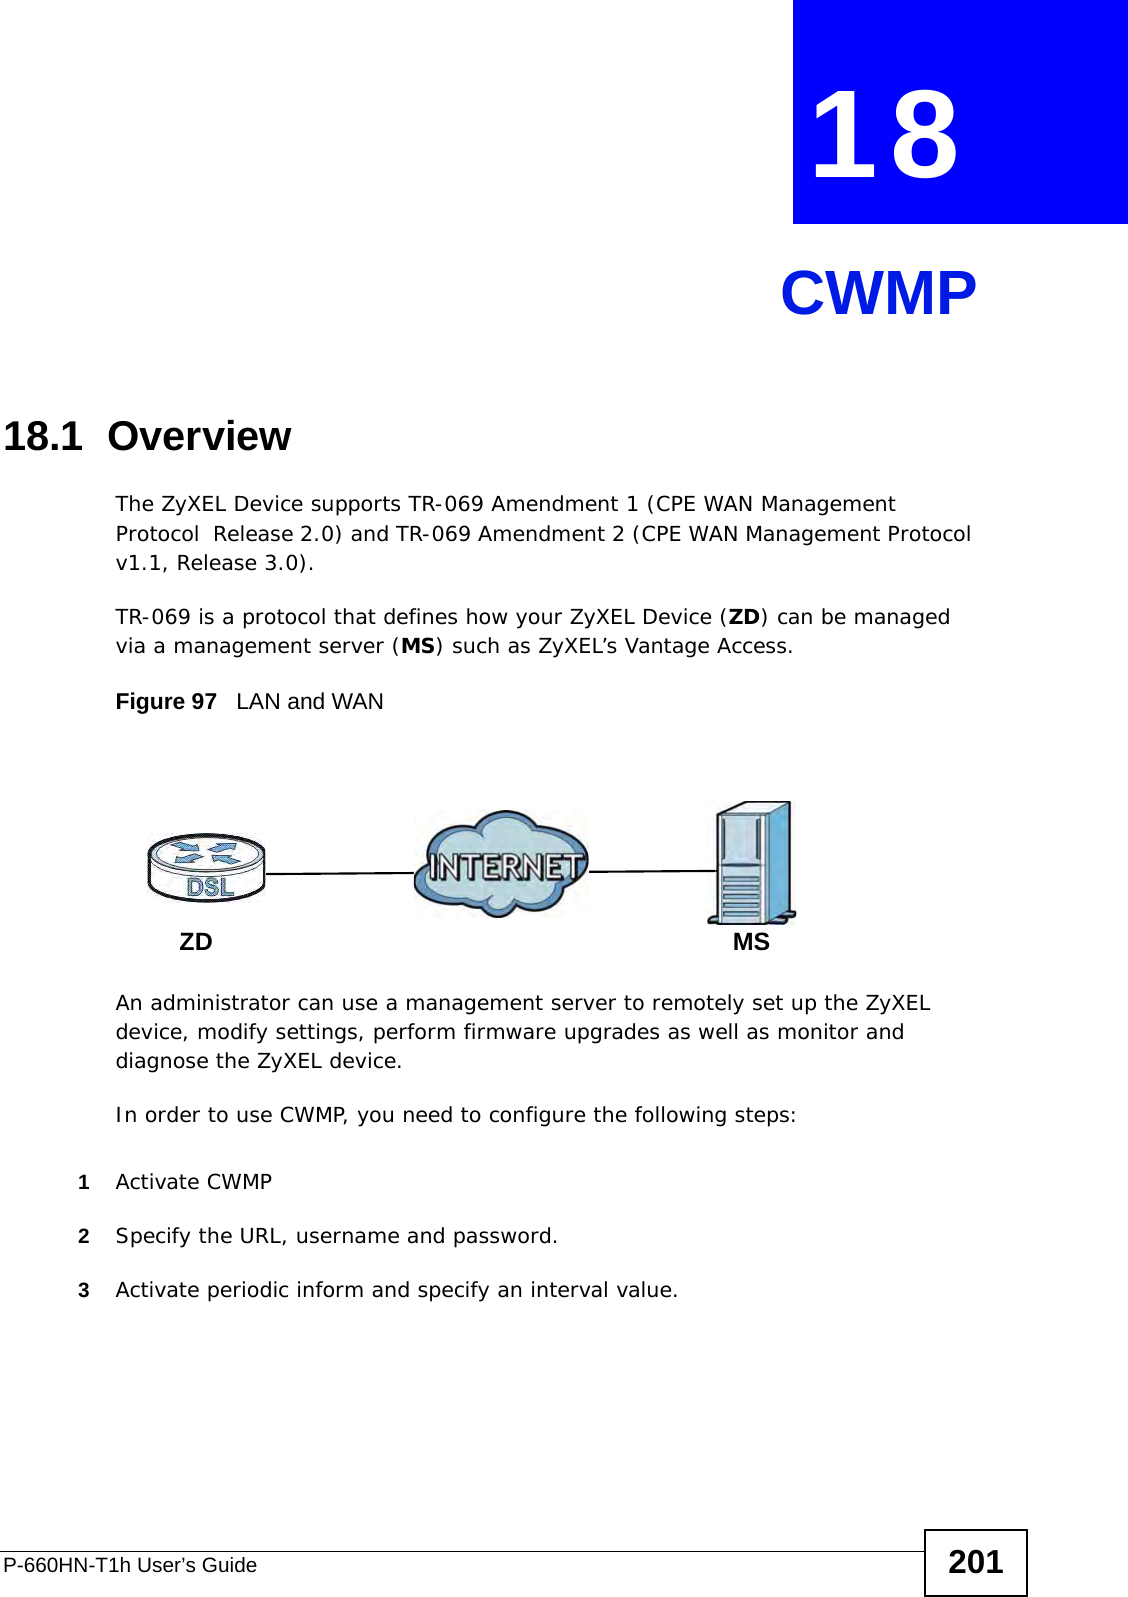 P-660HN-T1h User’s Guide 201CHAPTER  18 CWMP18.1  OverviewThe ZyXEL Device supports TR-069 Amendment 1 (CPE WAN Management Protocol  Release 2.0) and TR-069 Amendment 2 (CPE WAN Management Protocol v1.1, Release 3.0).TR-069 is a protocol that defines how your ZyXEL Device (ZD) can be managed via a management server (MS) such as ZyXEL’s Vantage Access. Figure 97   LAN and WANAn administrator can use a management server to remotely set up the ZyXEL device, modify settings, perform firmware upgrades as well as monitor and diagnose the ZyXEL device. In order to use CWMP, you need to configure the following steps:1Activate CWMP2Specify the URL, username and password.3Activate periodic inform and specify an interval value.MSZD